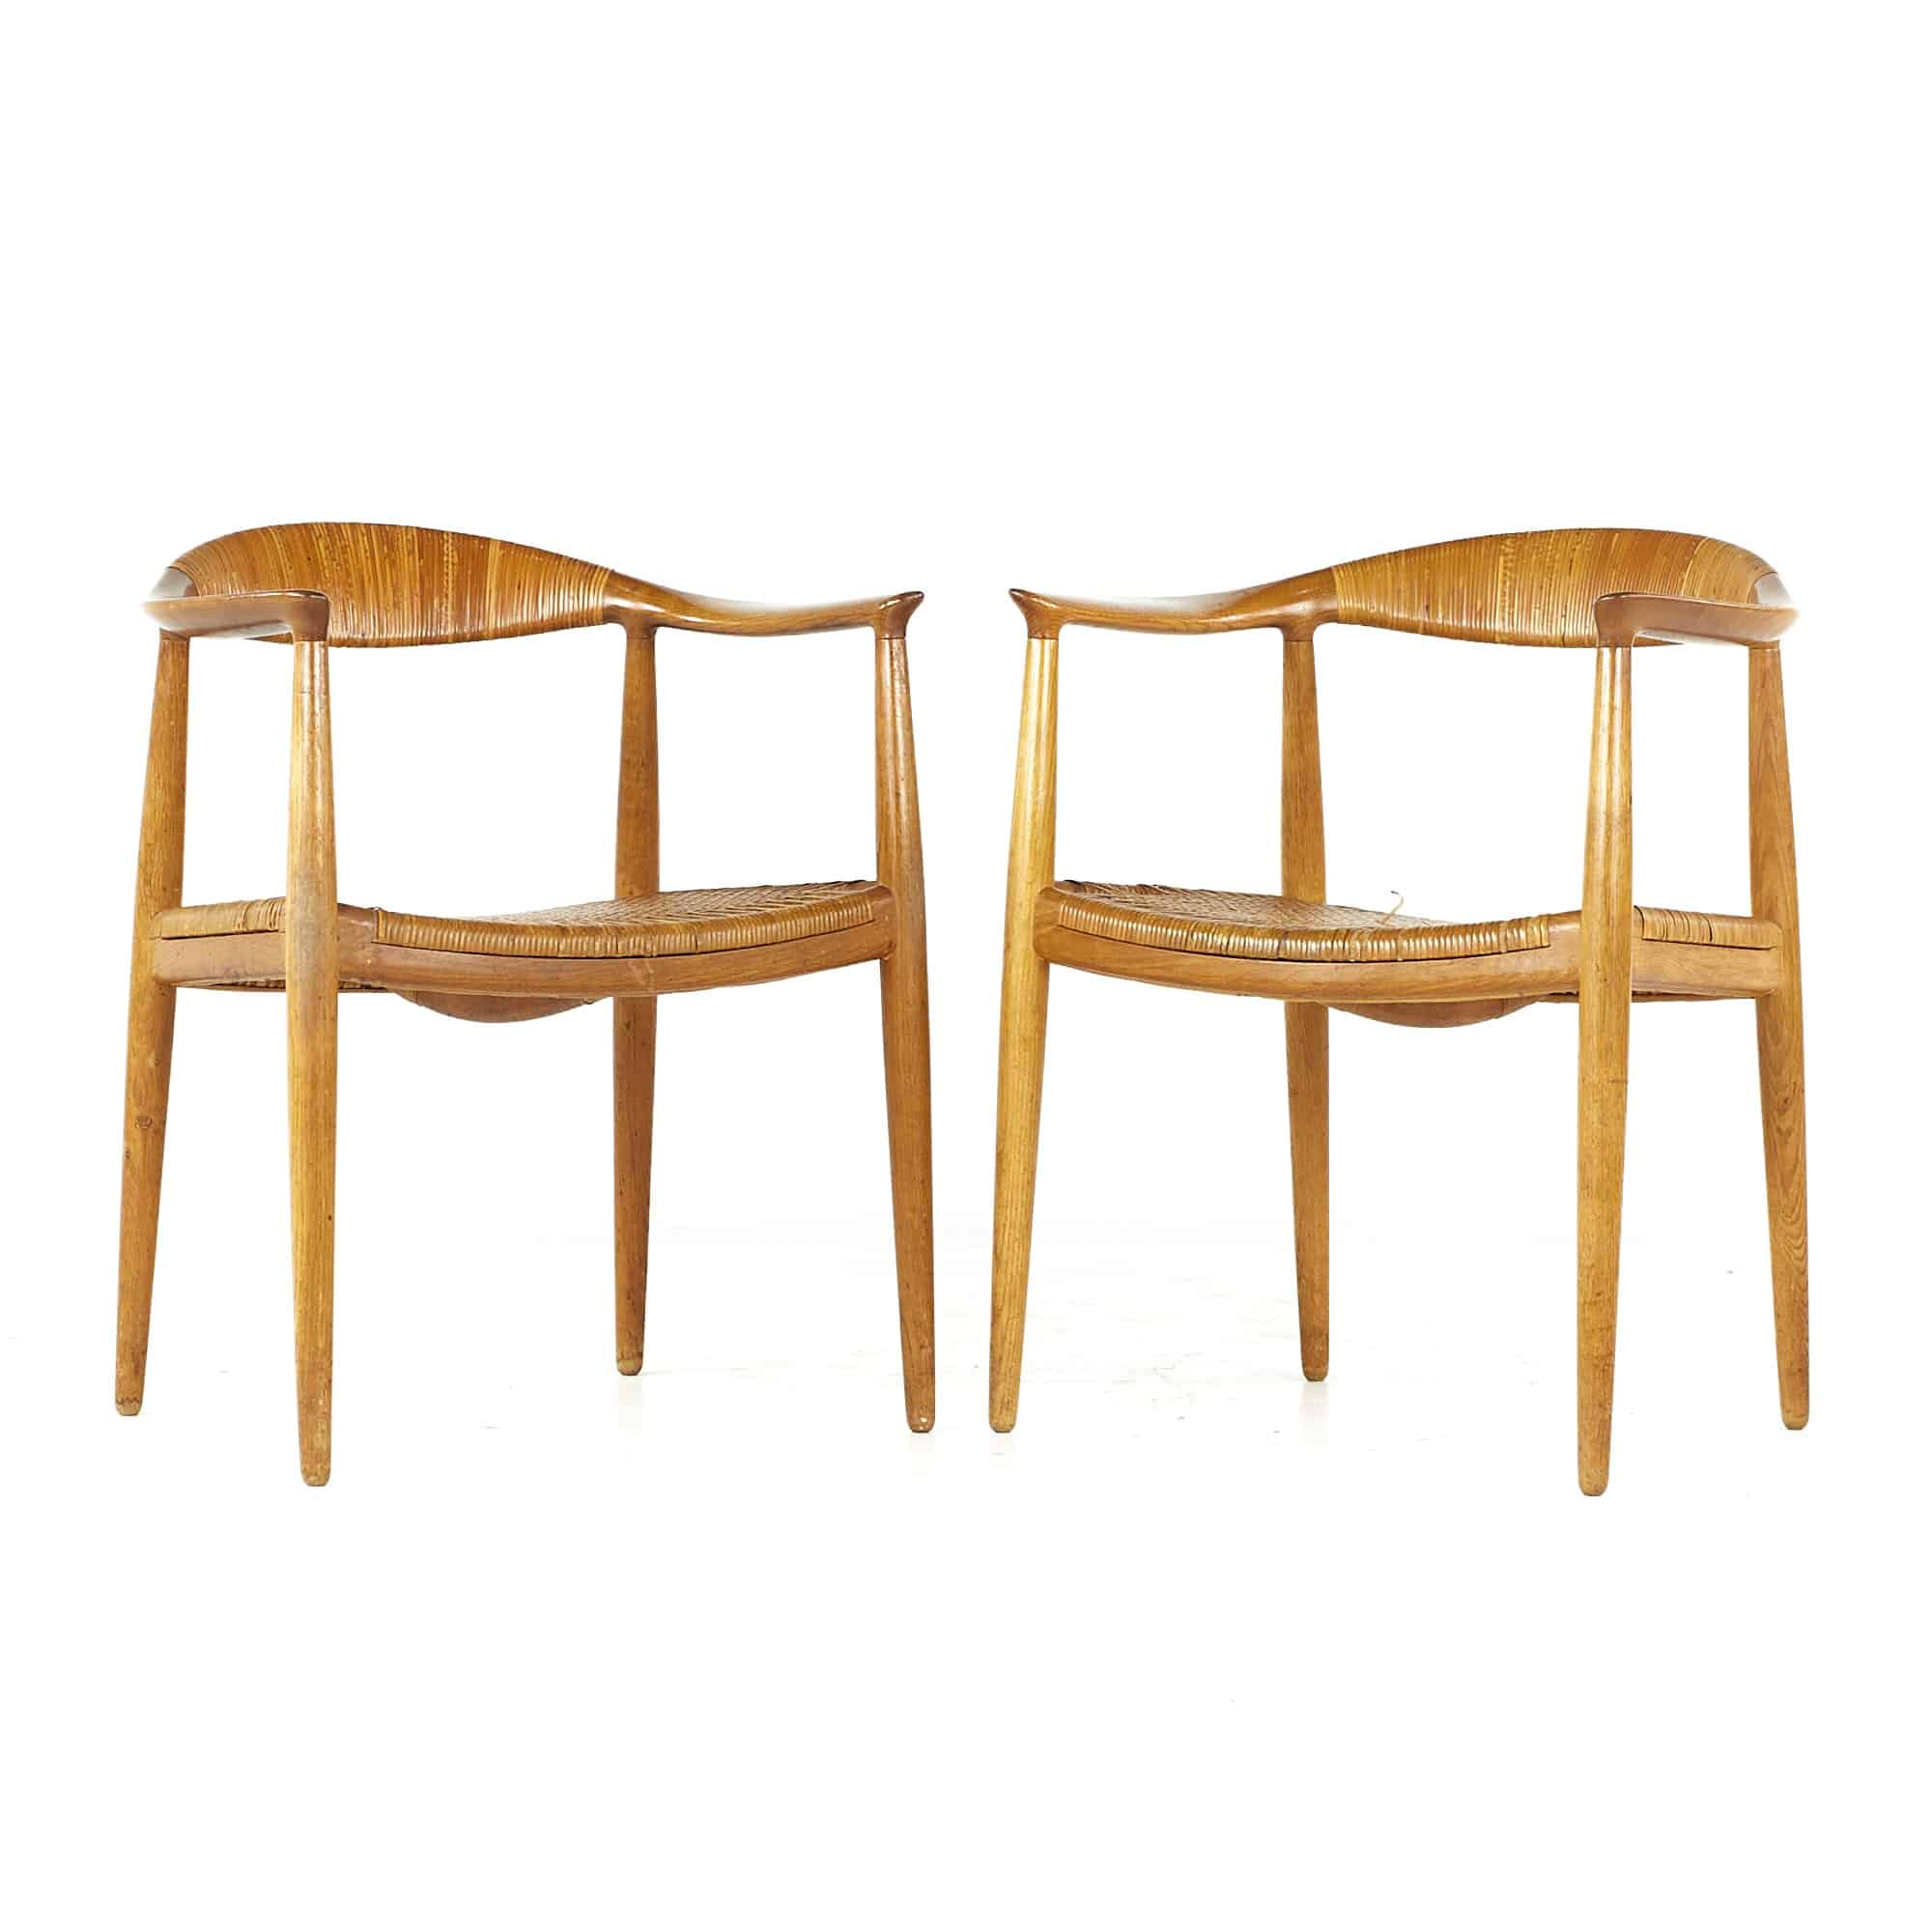 Hans Wegner Mid Century Presidential Teak and Cane Dining Chairs - Pair